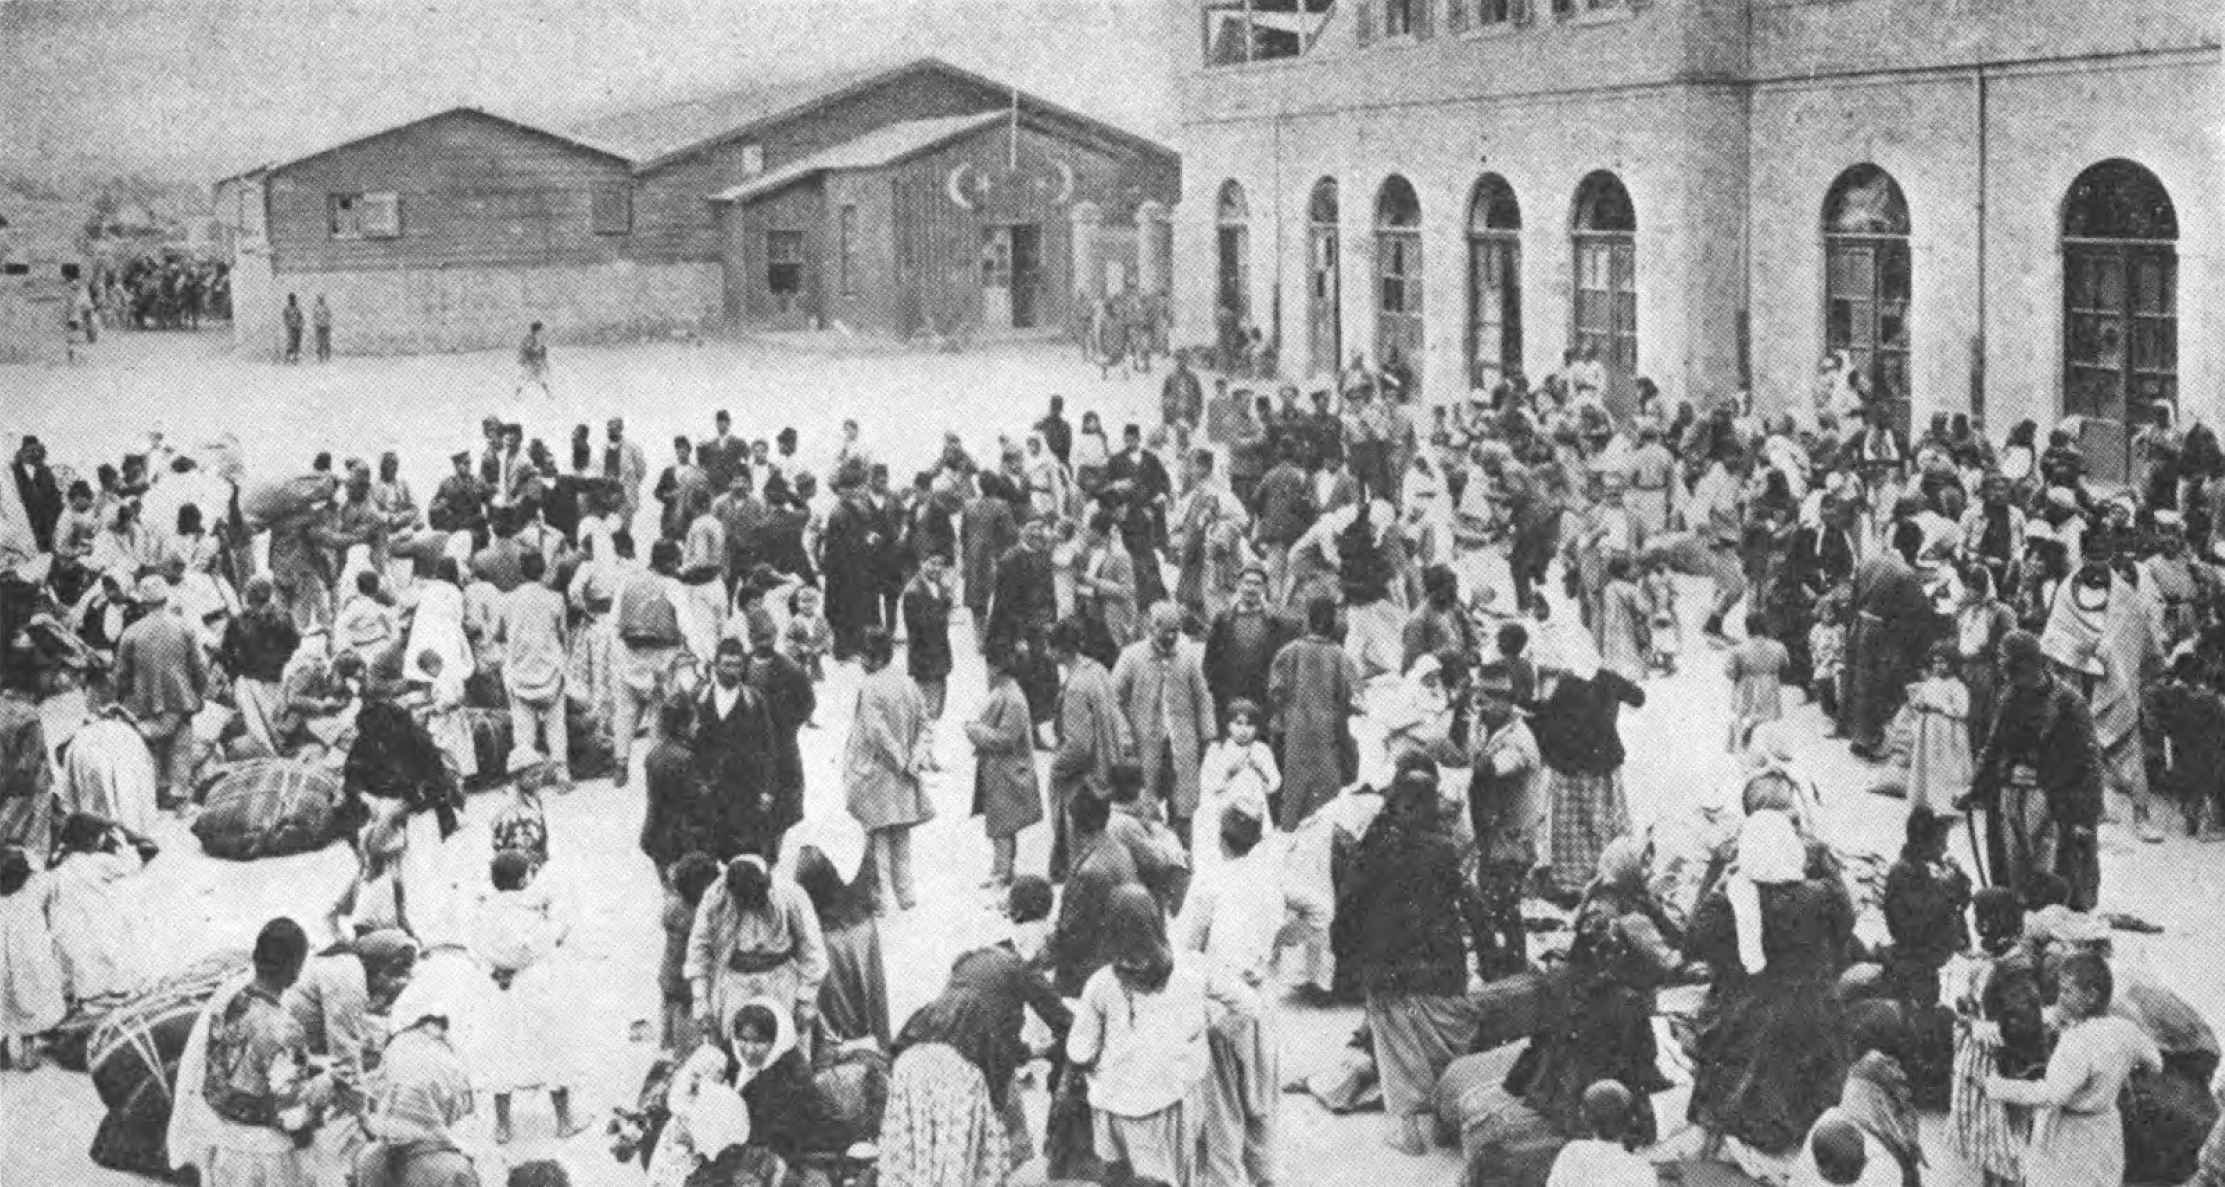 Armenians gathered in a city prior to deportation, 1918.